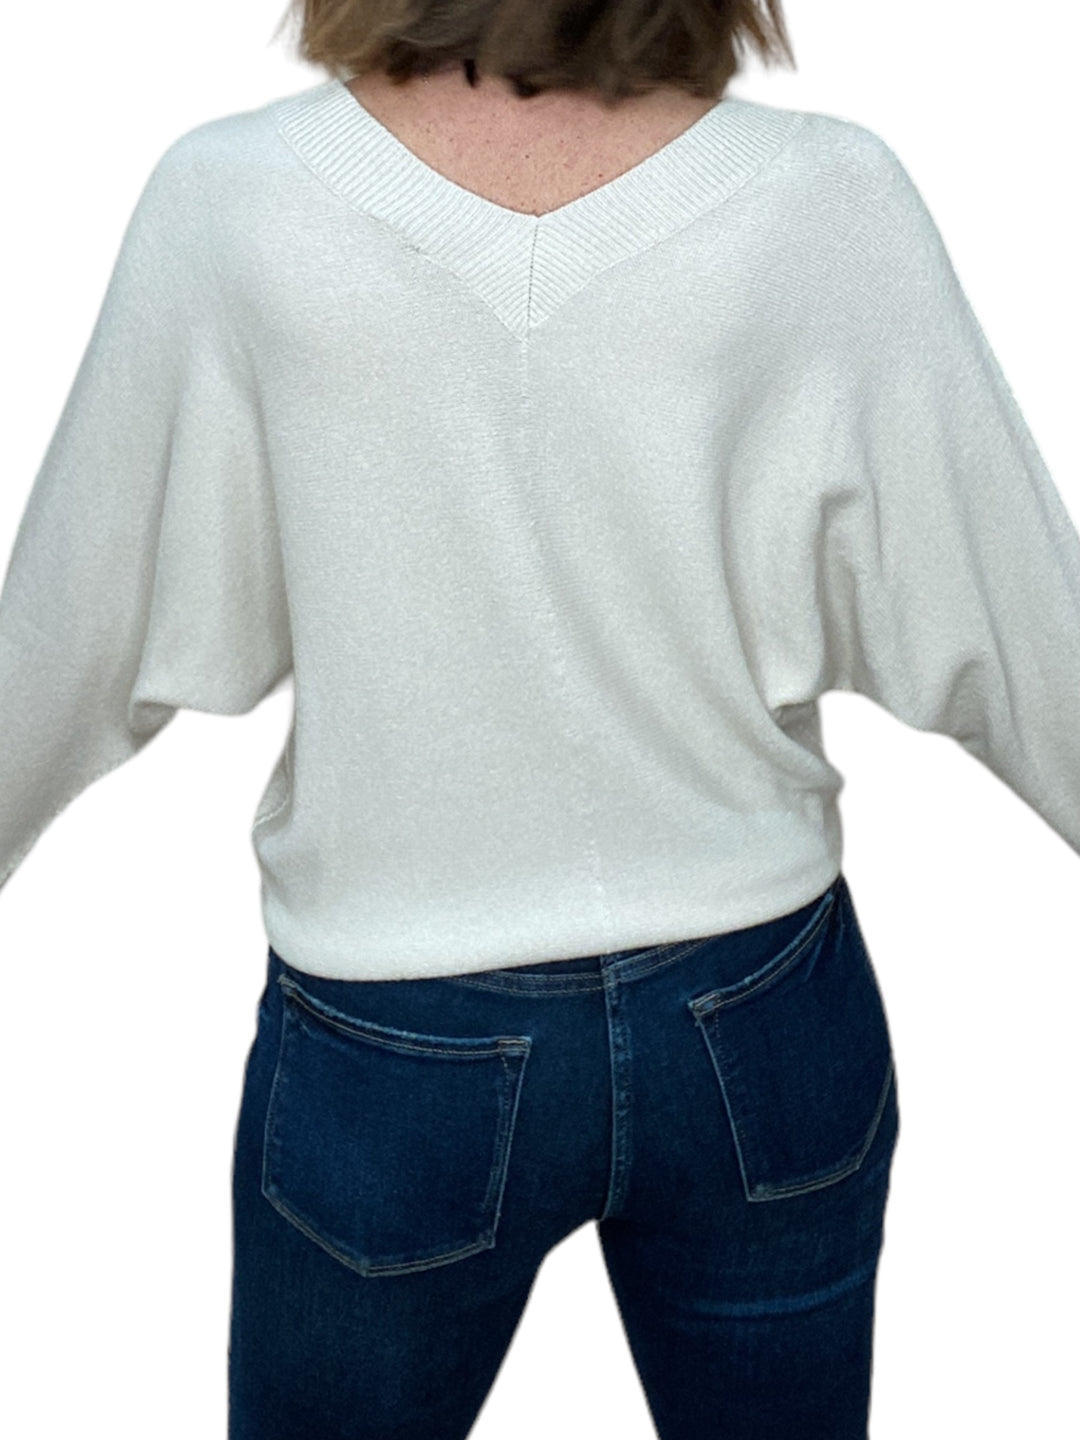 LENNY DOUBLE V NECK BATWING SWEATER-BEIGE - Kingfisher Road - Online Boutique